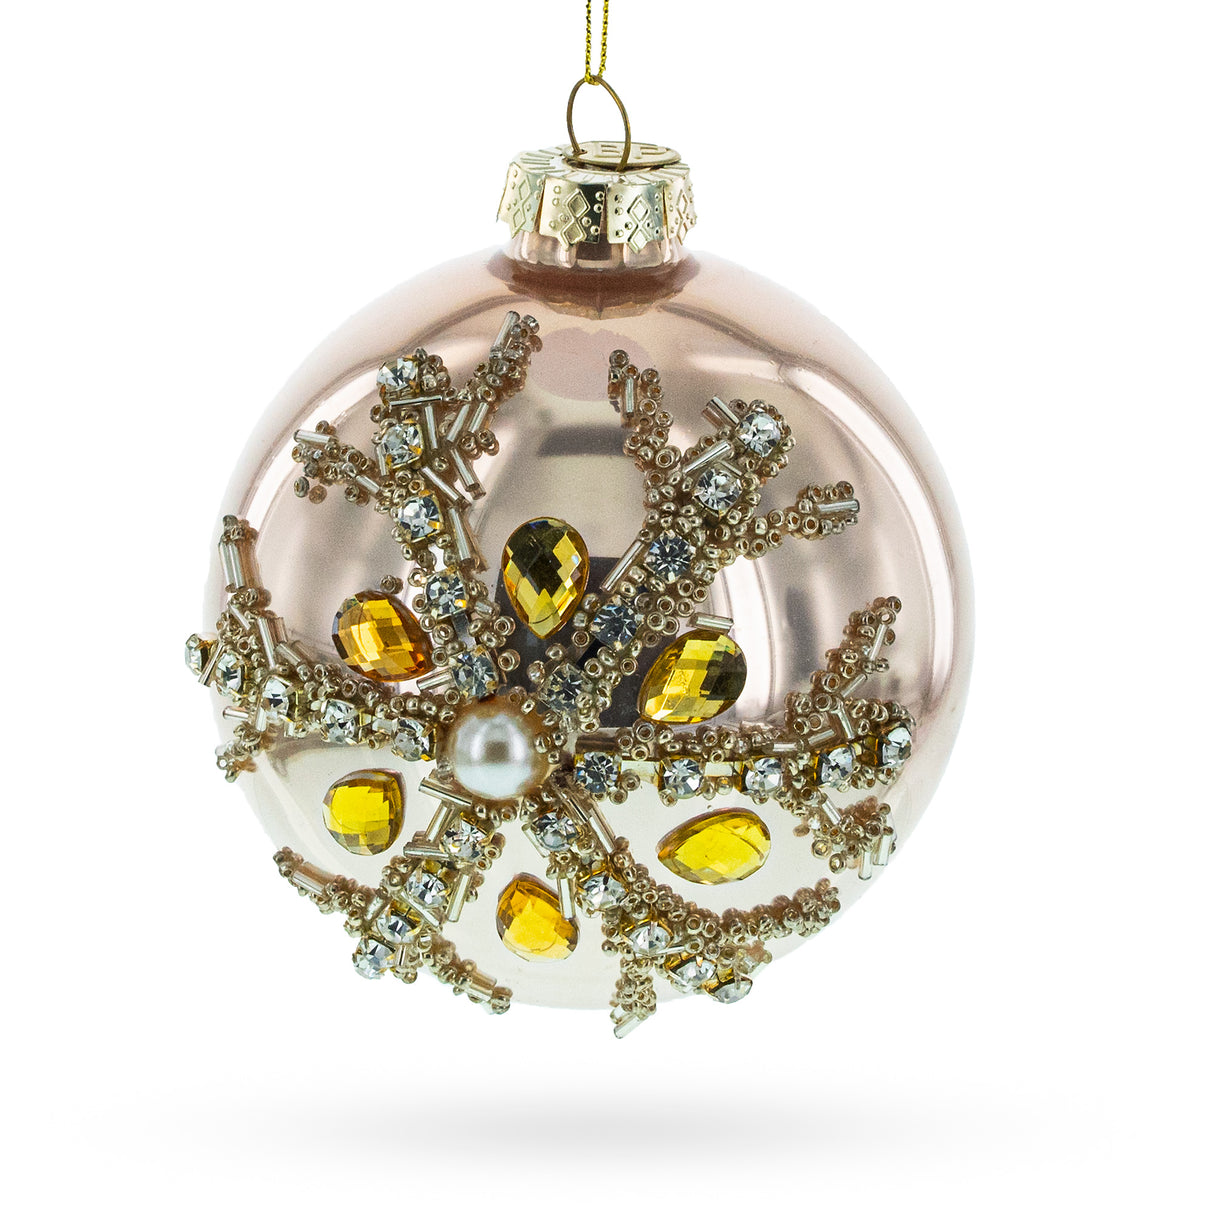 Exquisite Rose Gold and Yellow Bejeweled - Blown Glass Egg Christmas Ornament in Multi color, Round shape